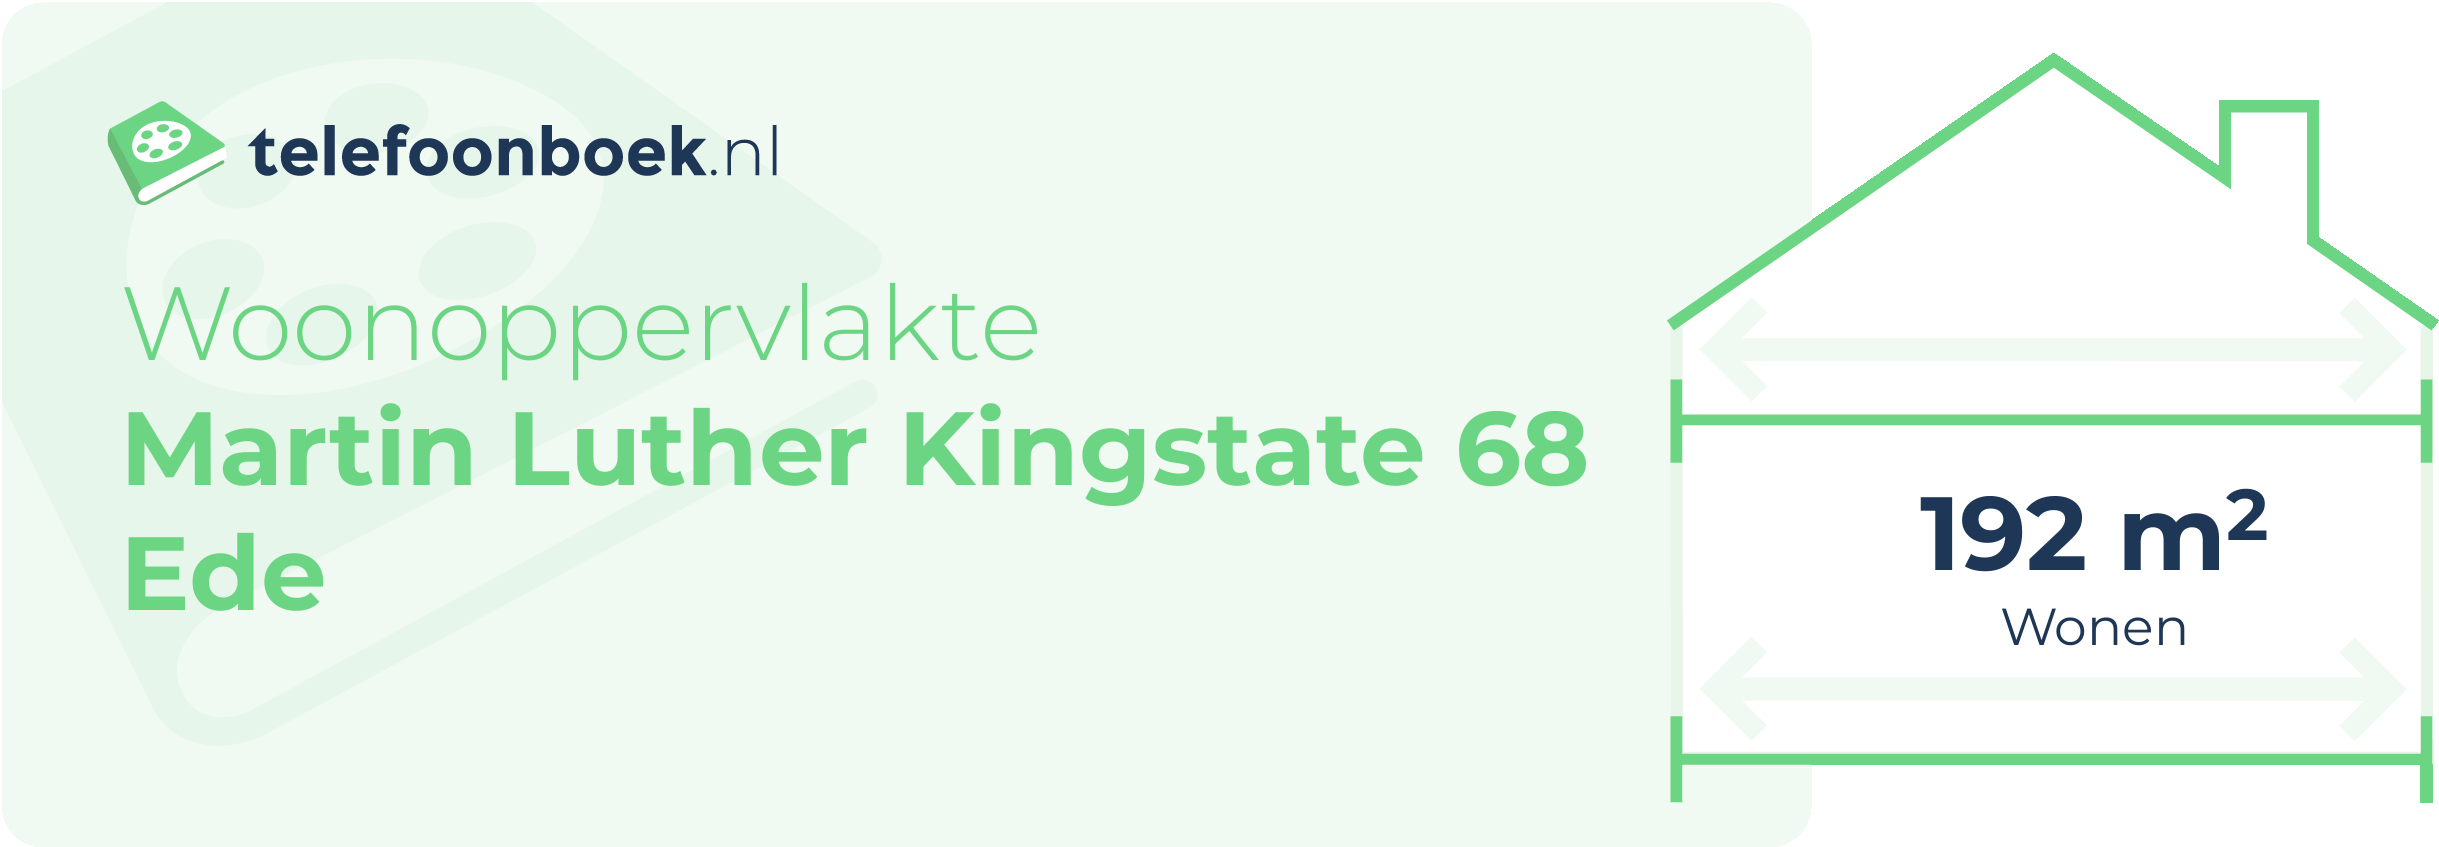 Woonoppervlakte Martin Luther Kingstate 68 Ede